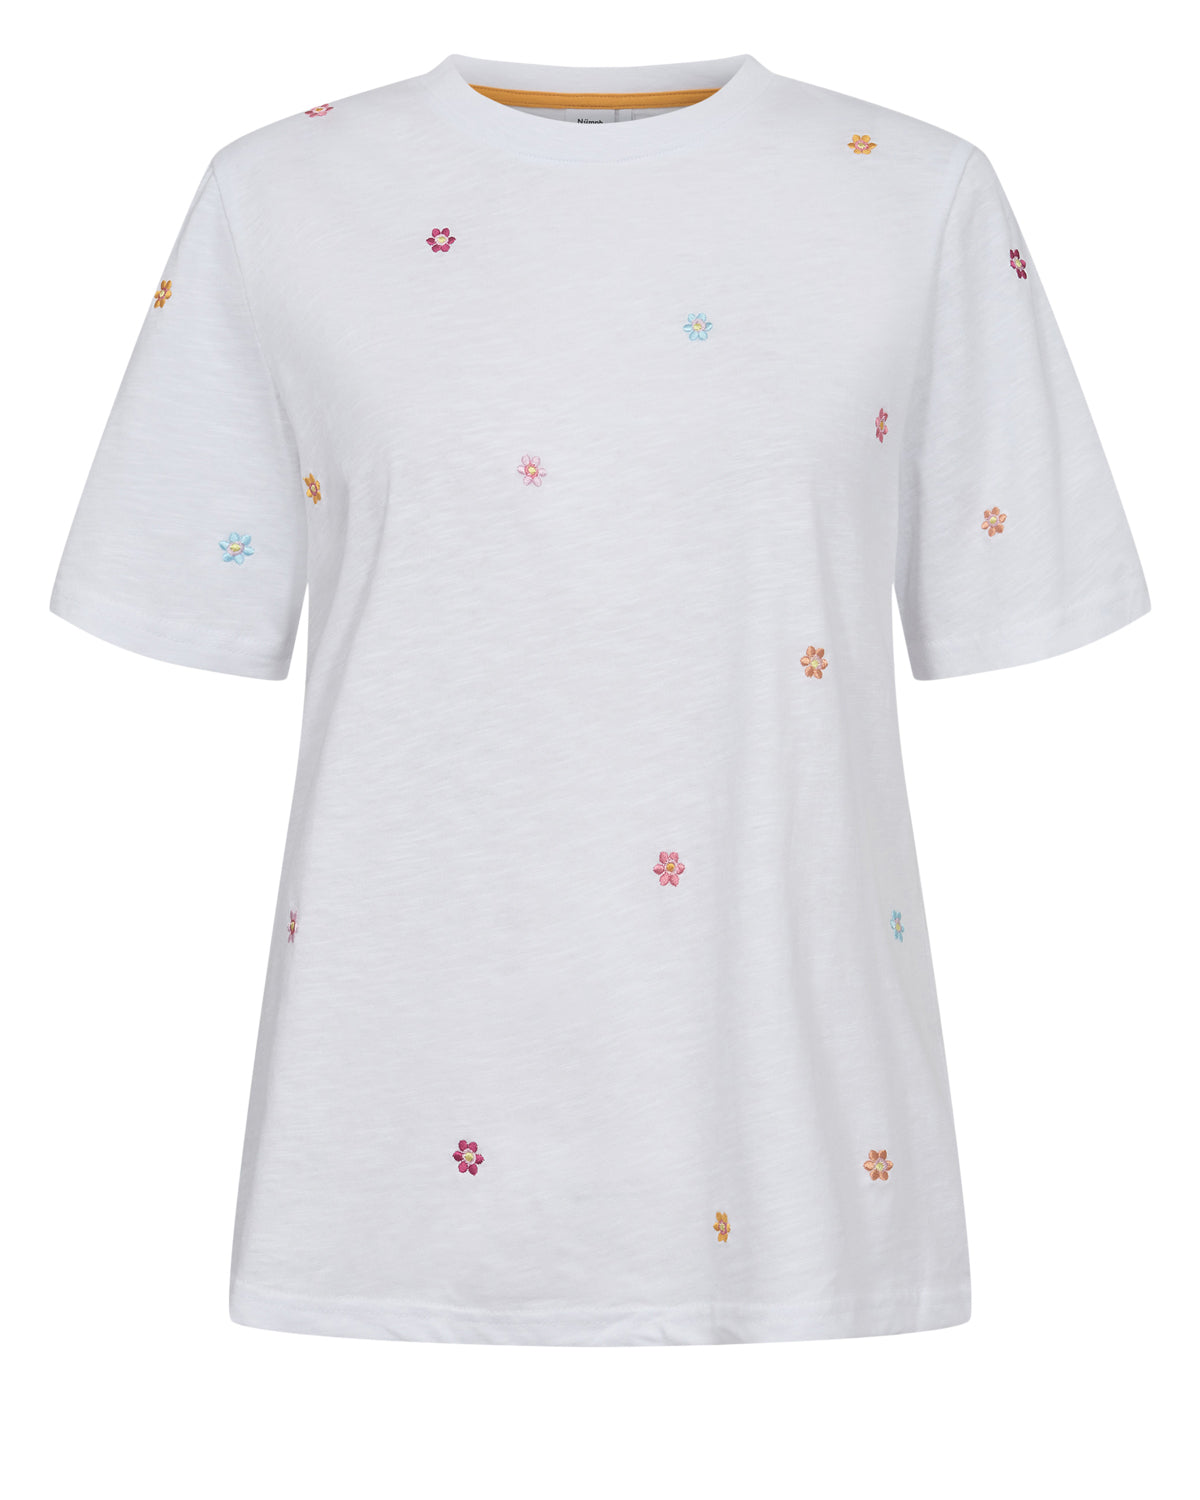 Numph nupilar t-shirt - bright white with flowers